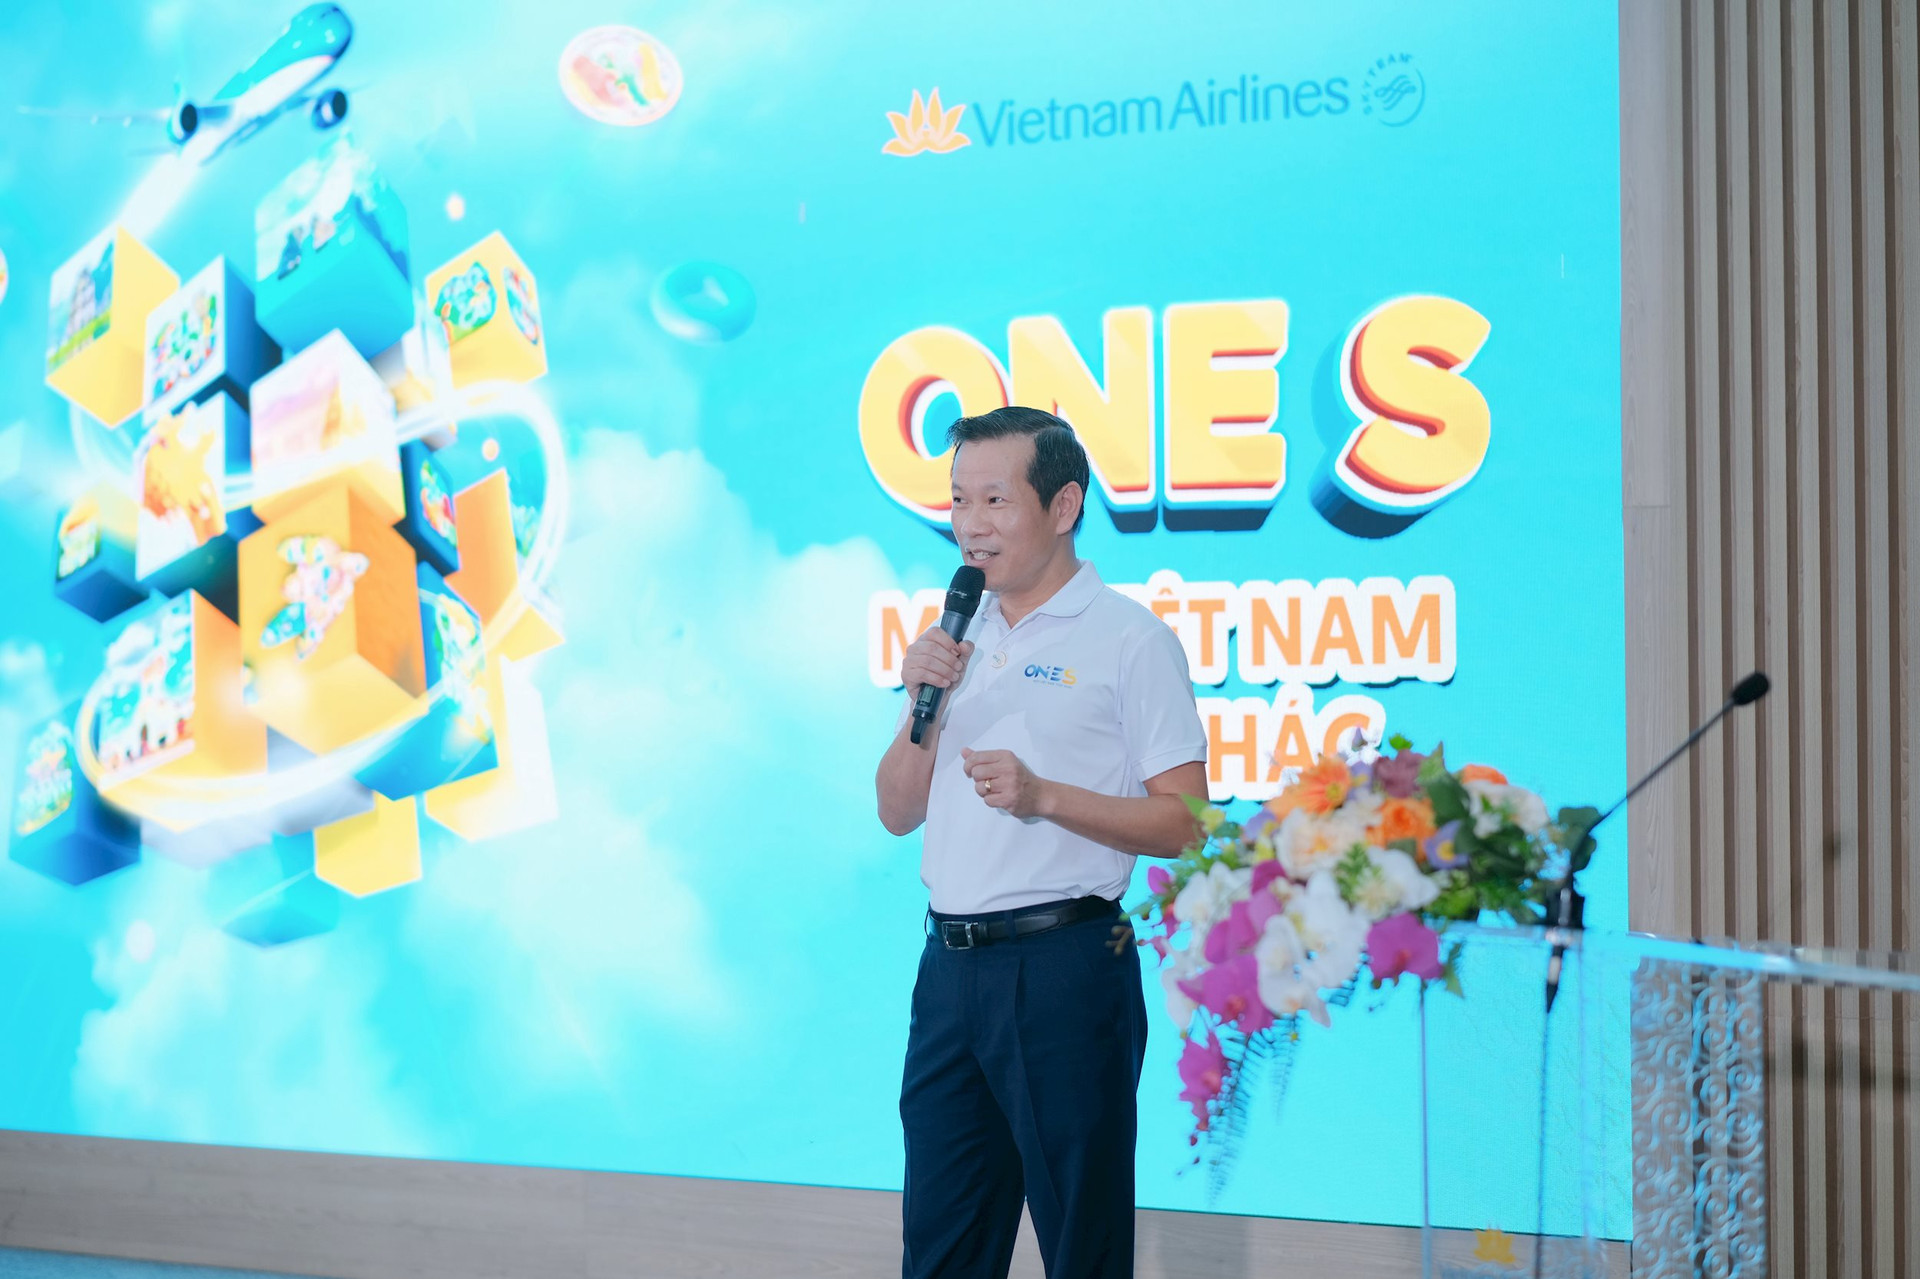 hinh-1.-ong-dang-anh-tuan-ptgd-vietnam-airlines-gioi-thieu-ve-ung-dung-one-s.jpg